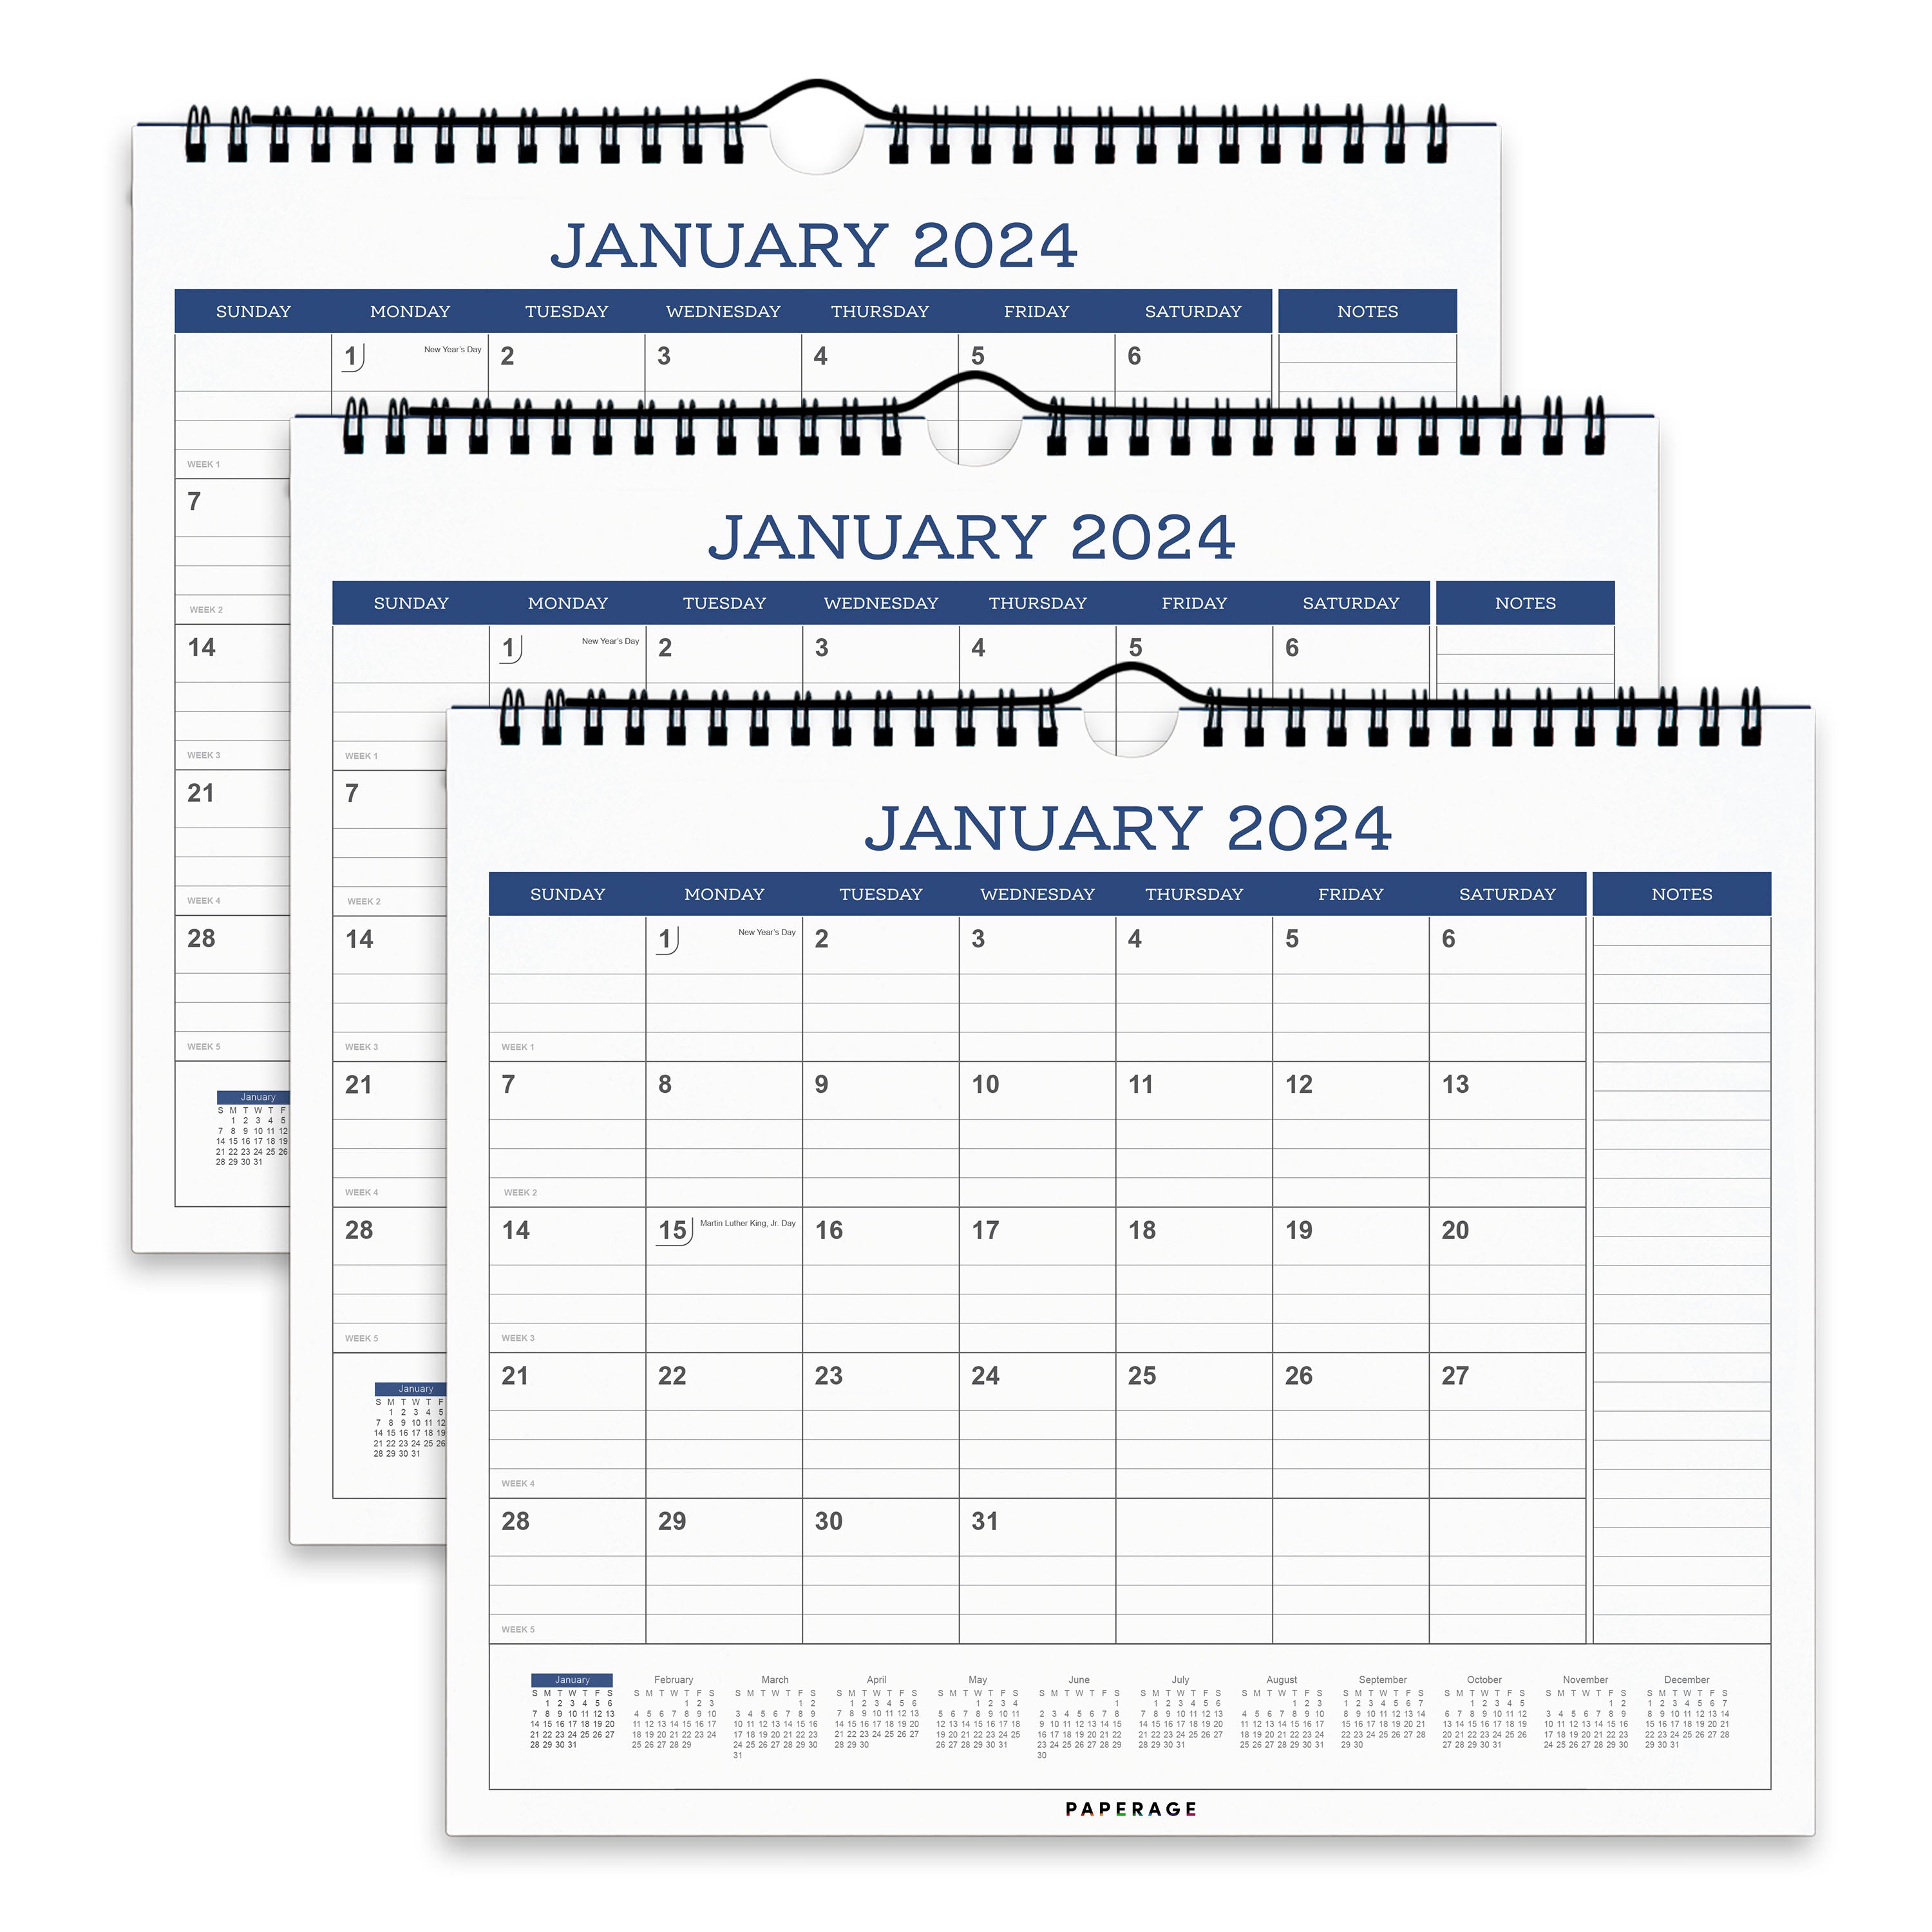 3 Pack Small Calendars - Minimalist Wall and Desk Calendar (9 in x 11 in)